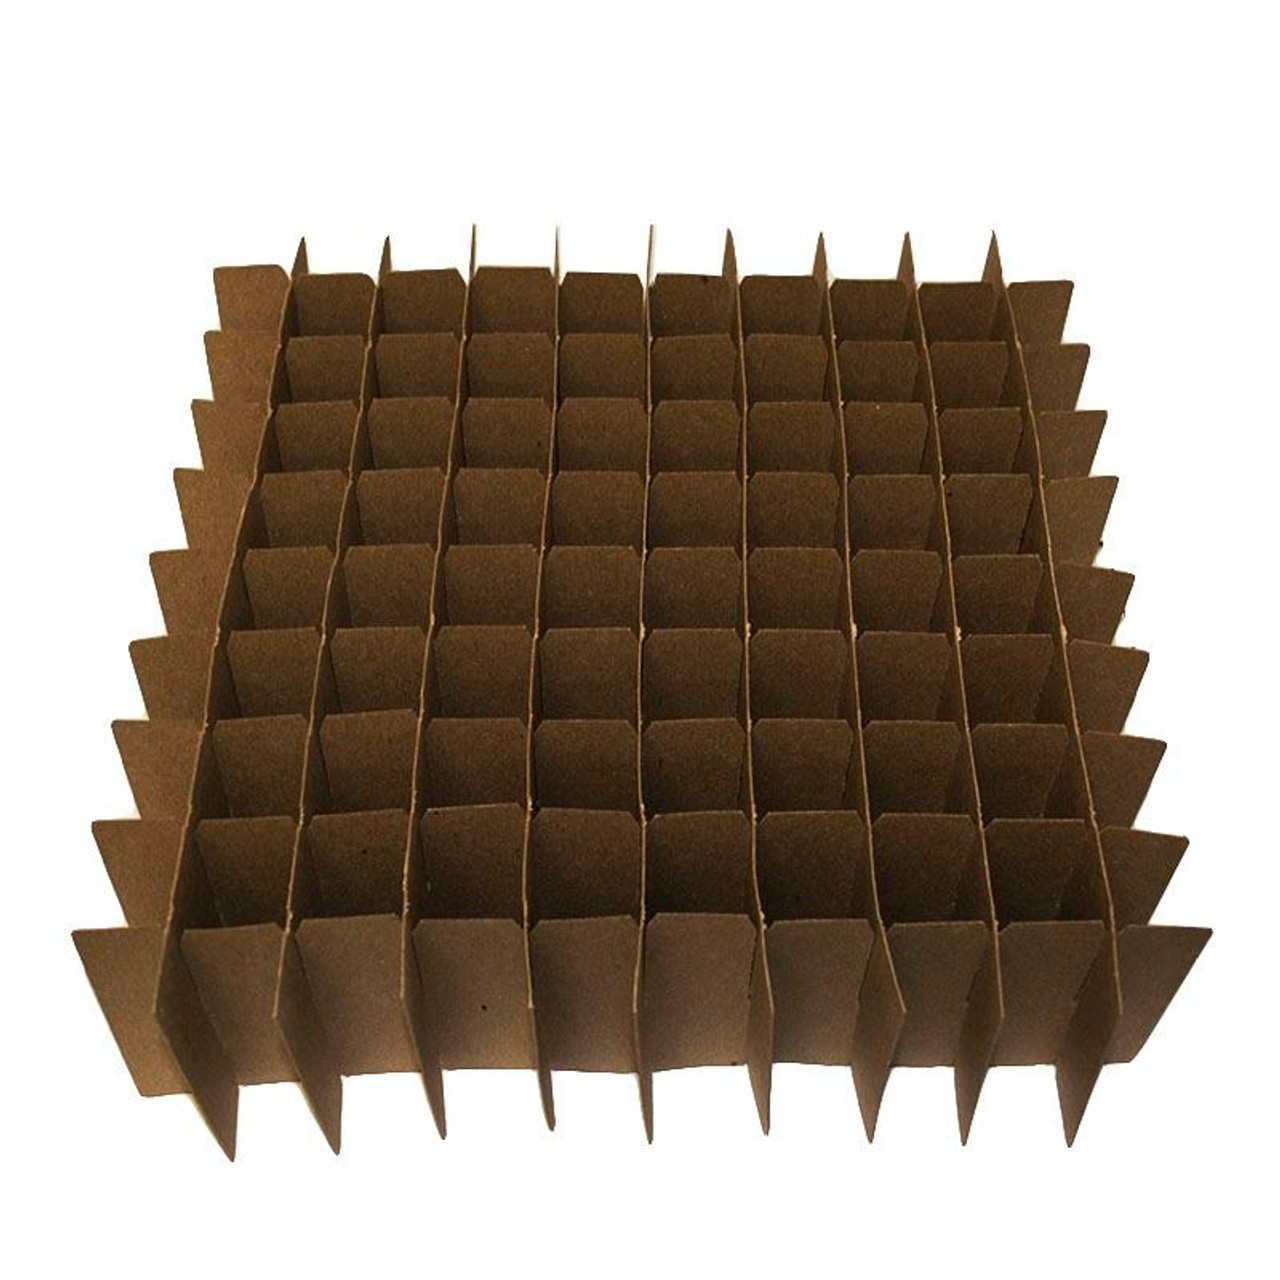 Only Partitions dividers for 100 Cells boxes (Fits 100 - 15ml, and